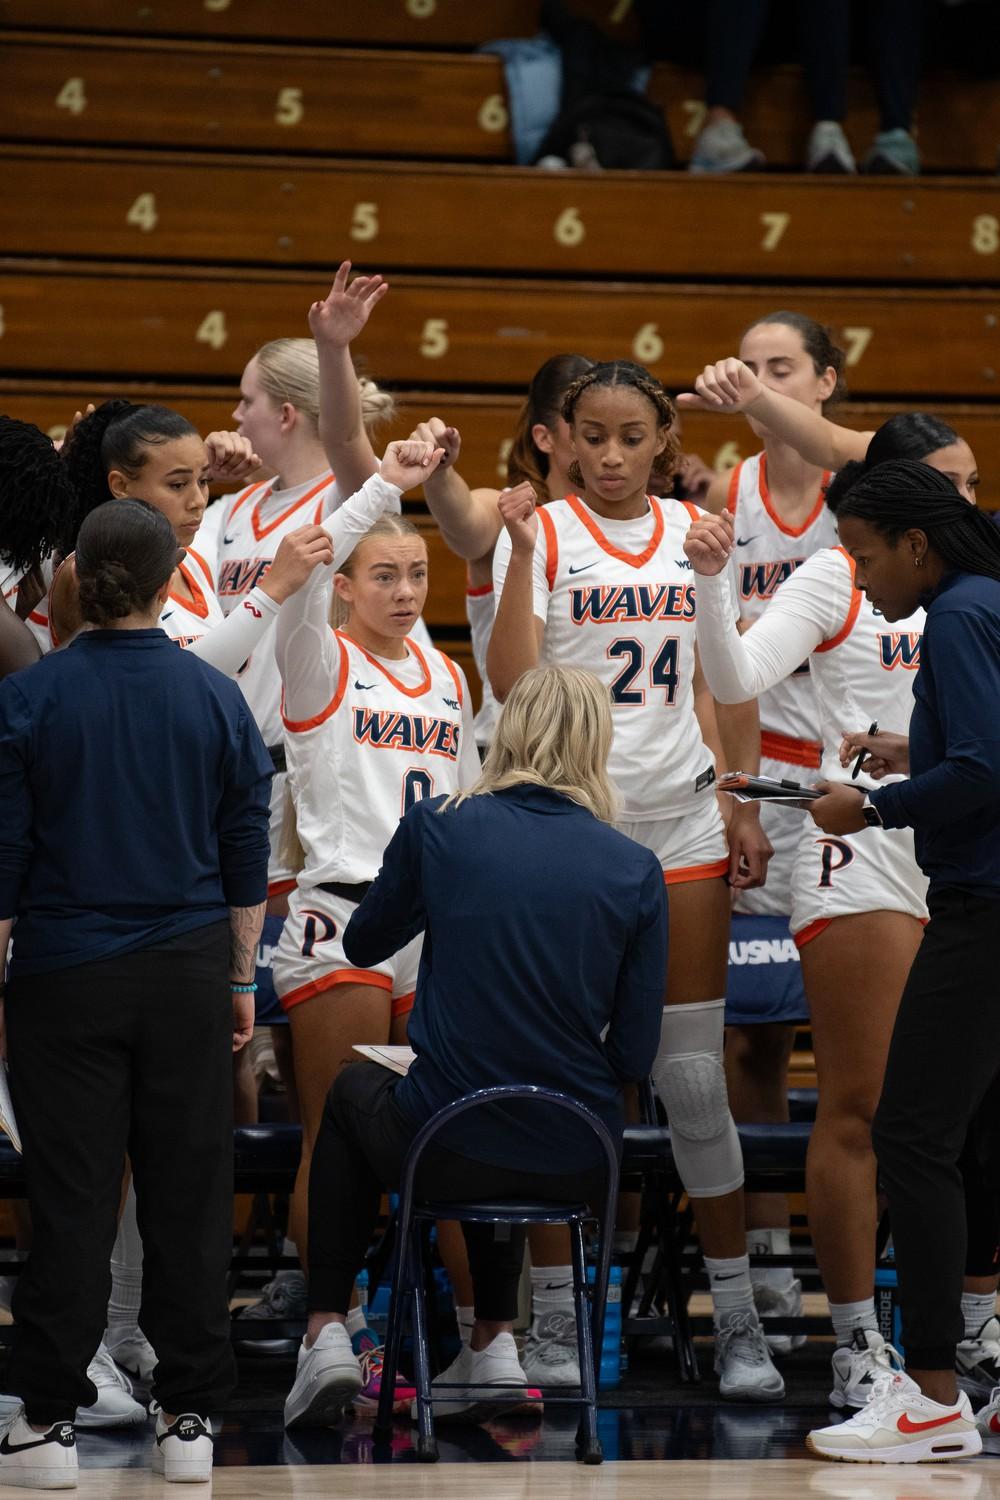 Pepperdine gets ready to break out of a timeout. The Waves utilized all their timeouts this match saving two timeouts for the fourth quarter, and used both during the last 30 seconds of regulation. Photo courtesy of Alexander Li